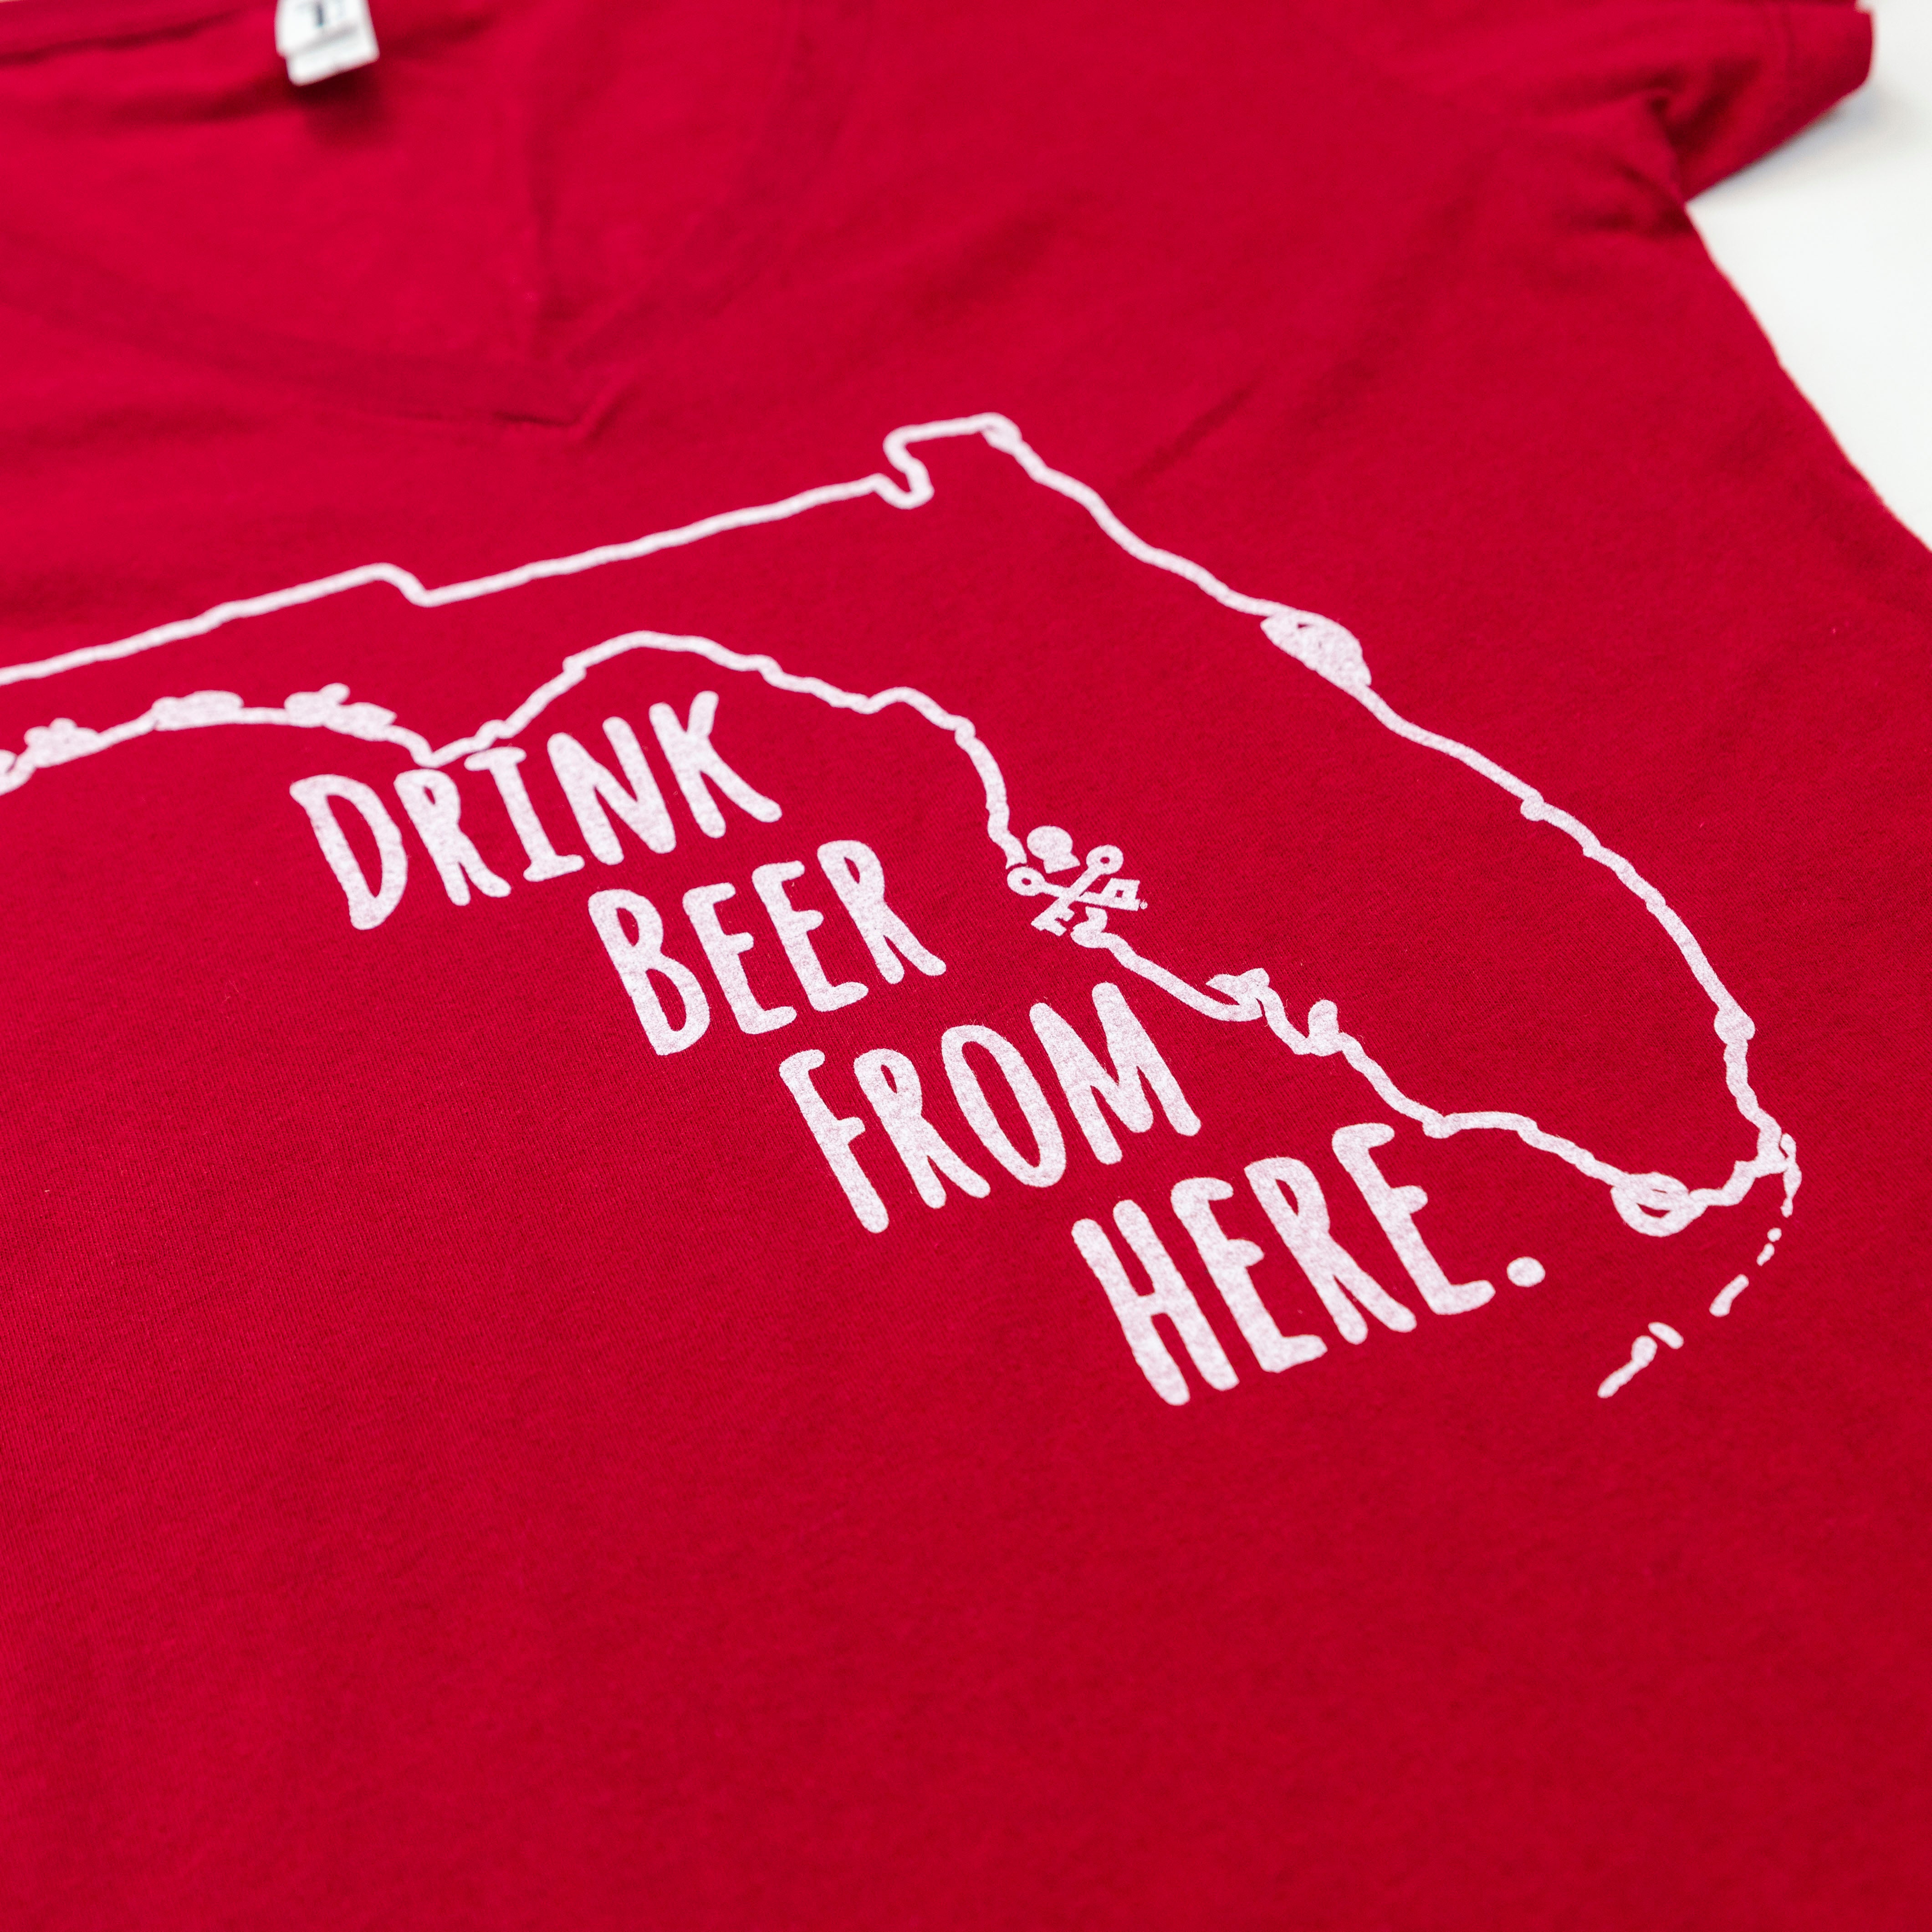 Drink Beer From Here – Women’s T-Shirt Maroon